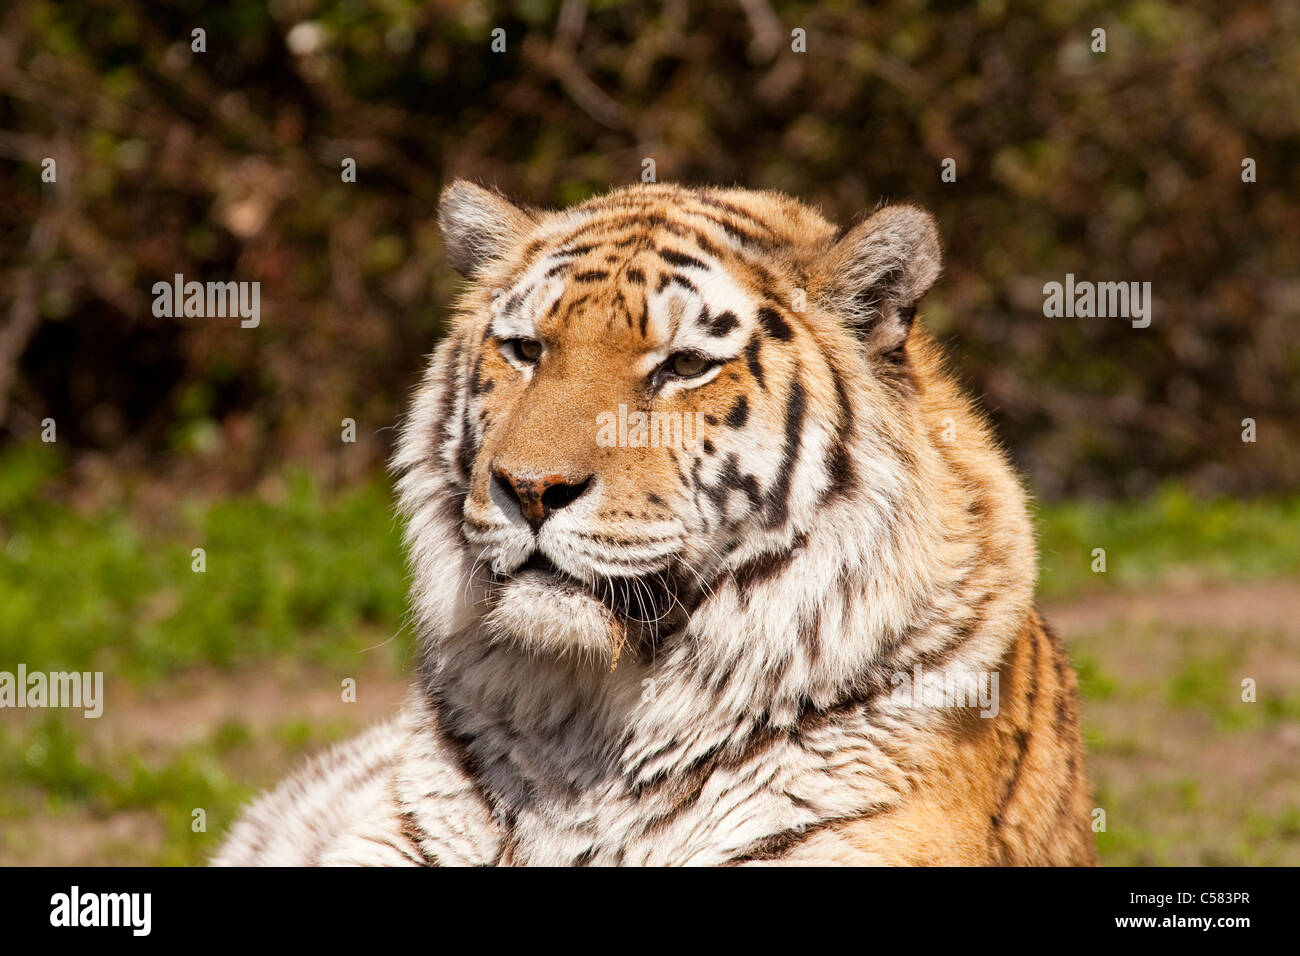 altaica, Amur tiger, outside, Carnivora, outdoors, outside, individually, fauna, great cat, Catlikely, Panthera, Pantherinae, bi Stock Photo